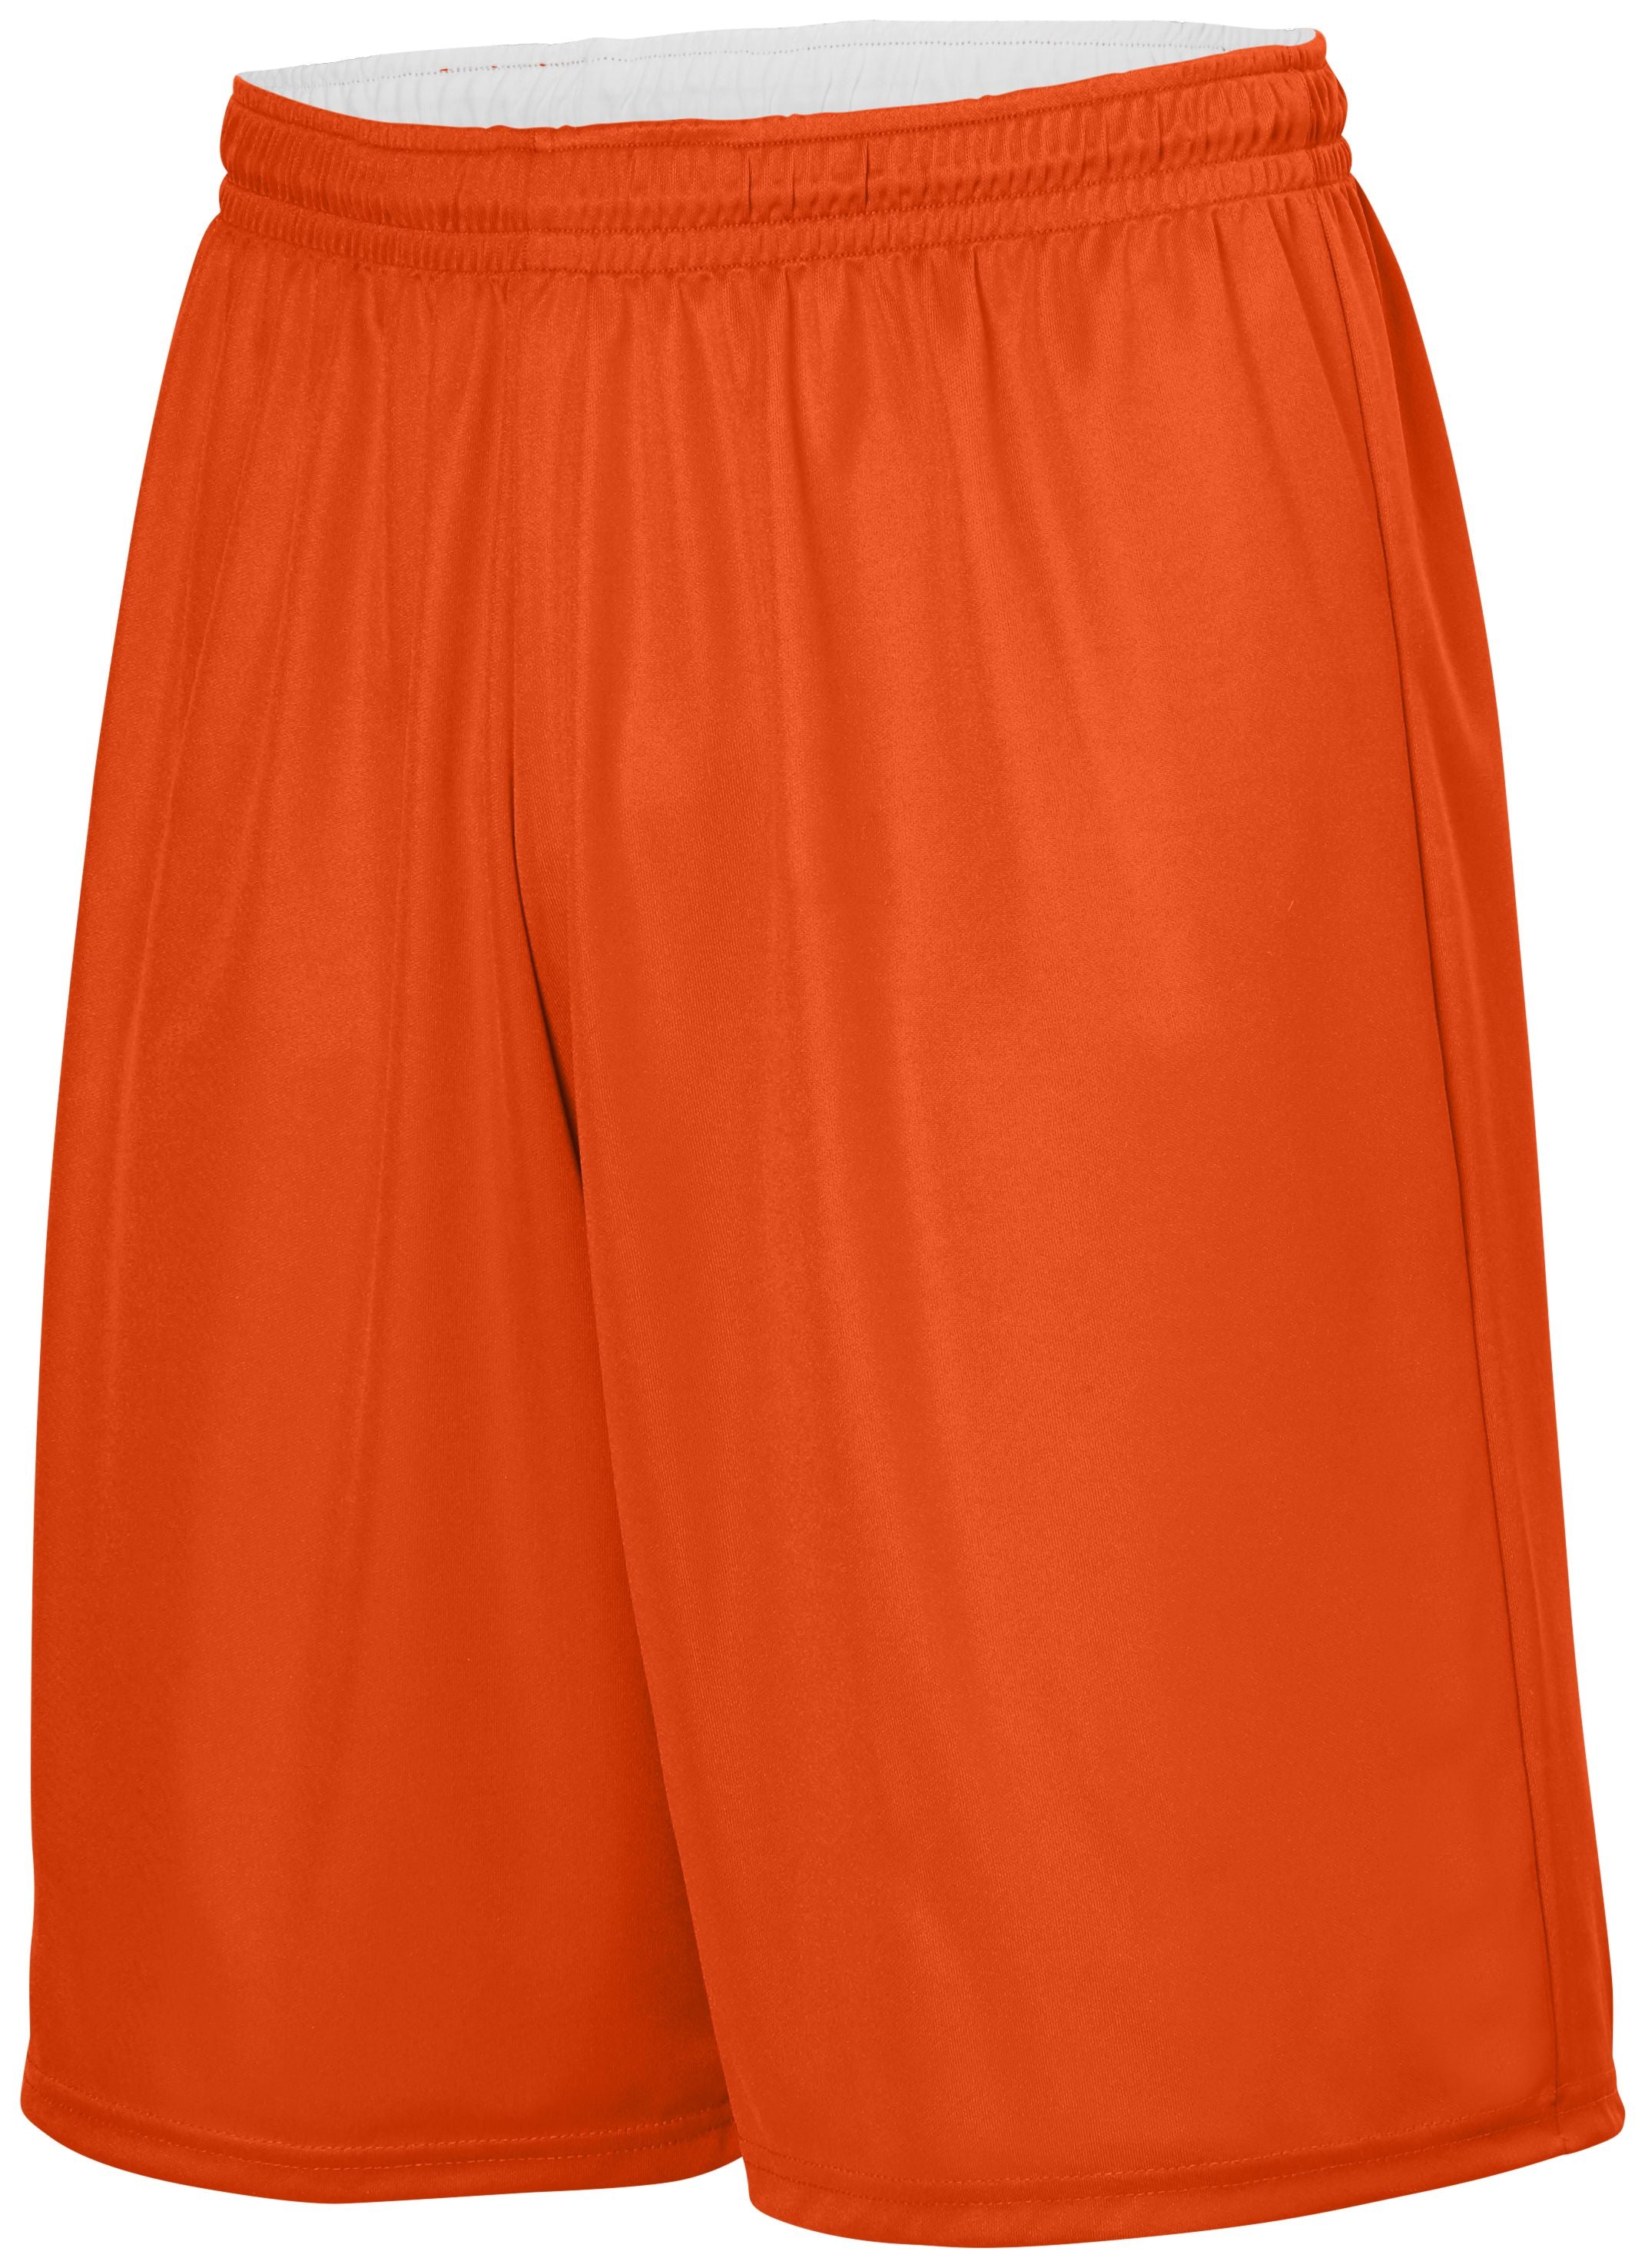 Augusta Sportswear Youth Reversible Wicking Shorts in Orange/White  -Part of the Youth, Youth-Shorts, Augusta-Products, Basketball, All-Sports, All-Sports-1 product lines at KanaleyCreations.com